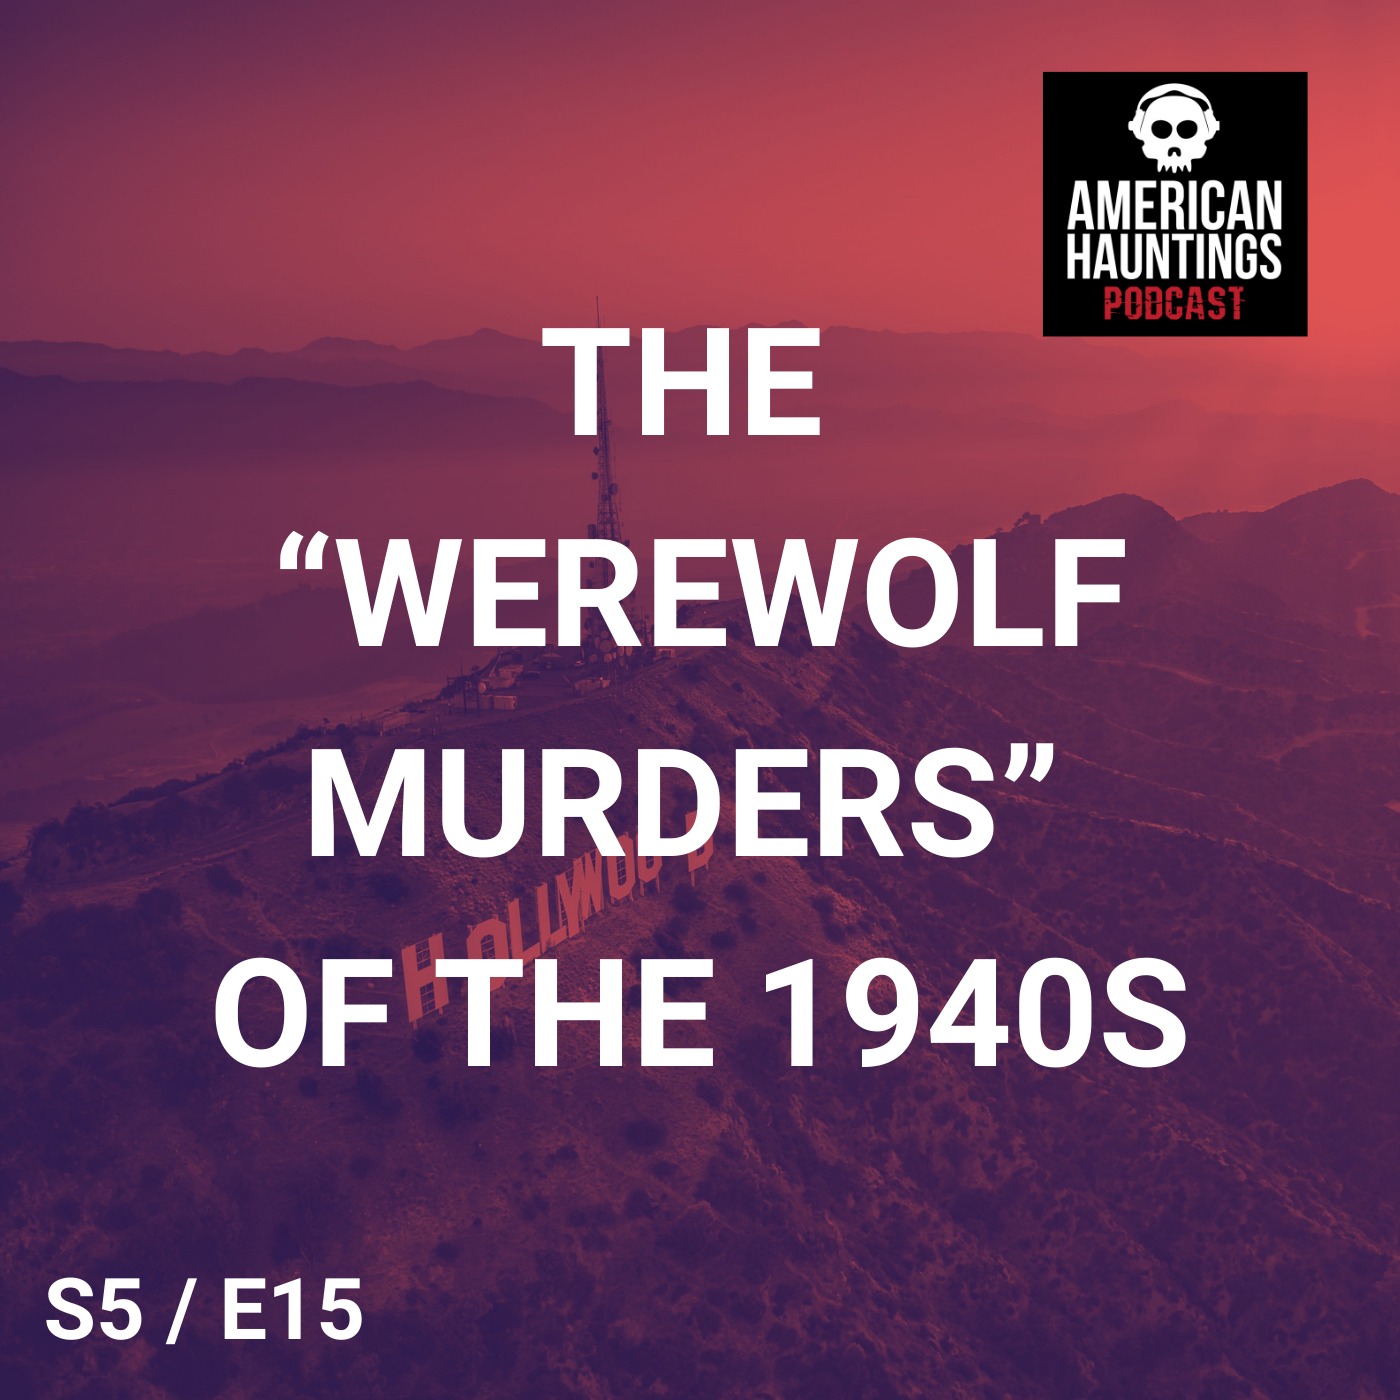 The Werewolf Murders of the 1940's